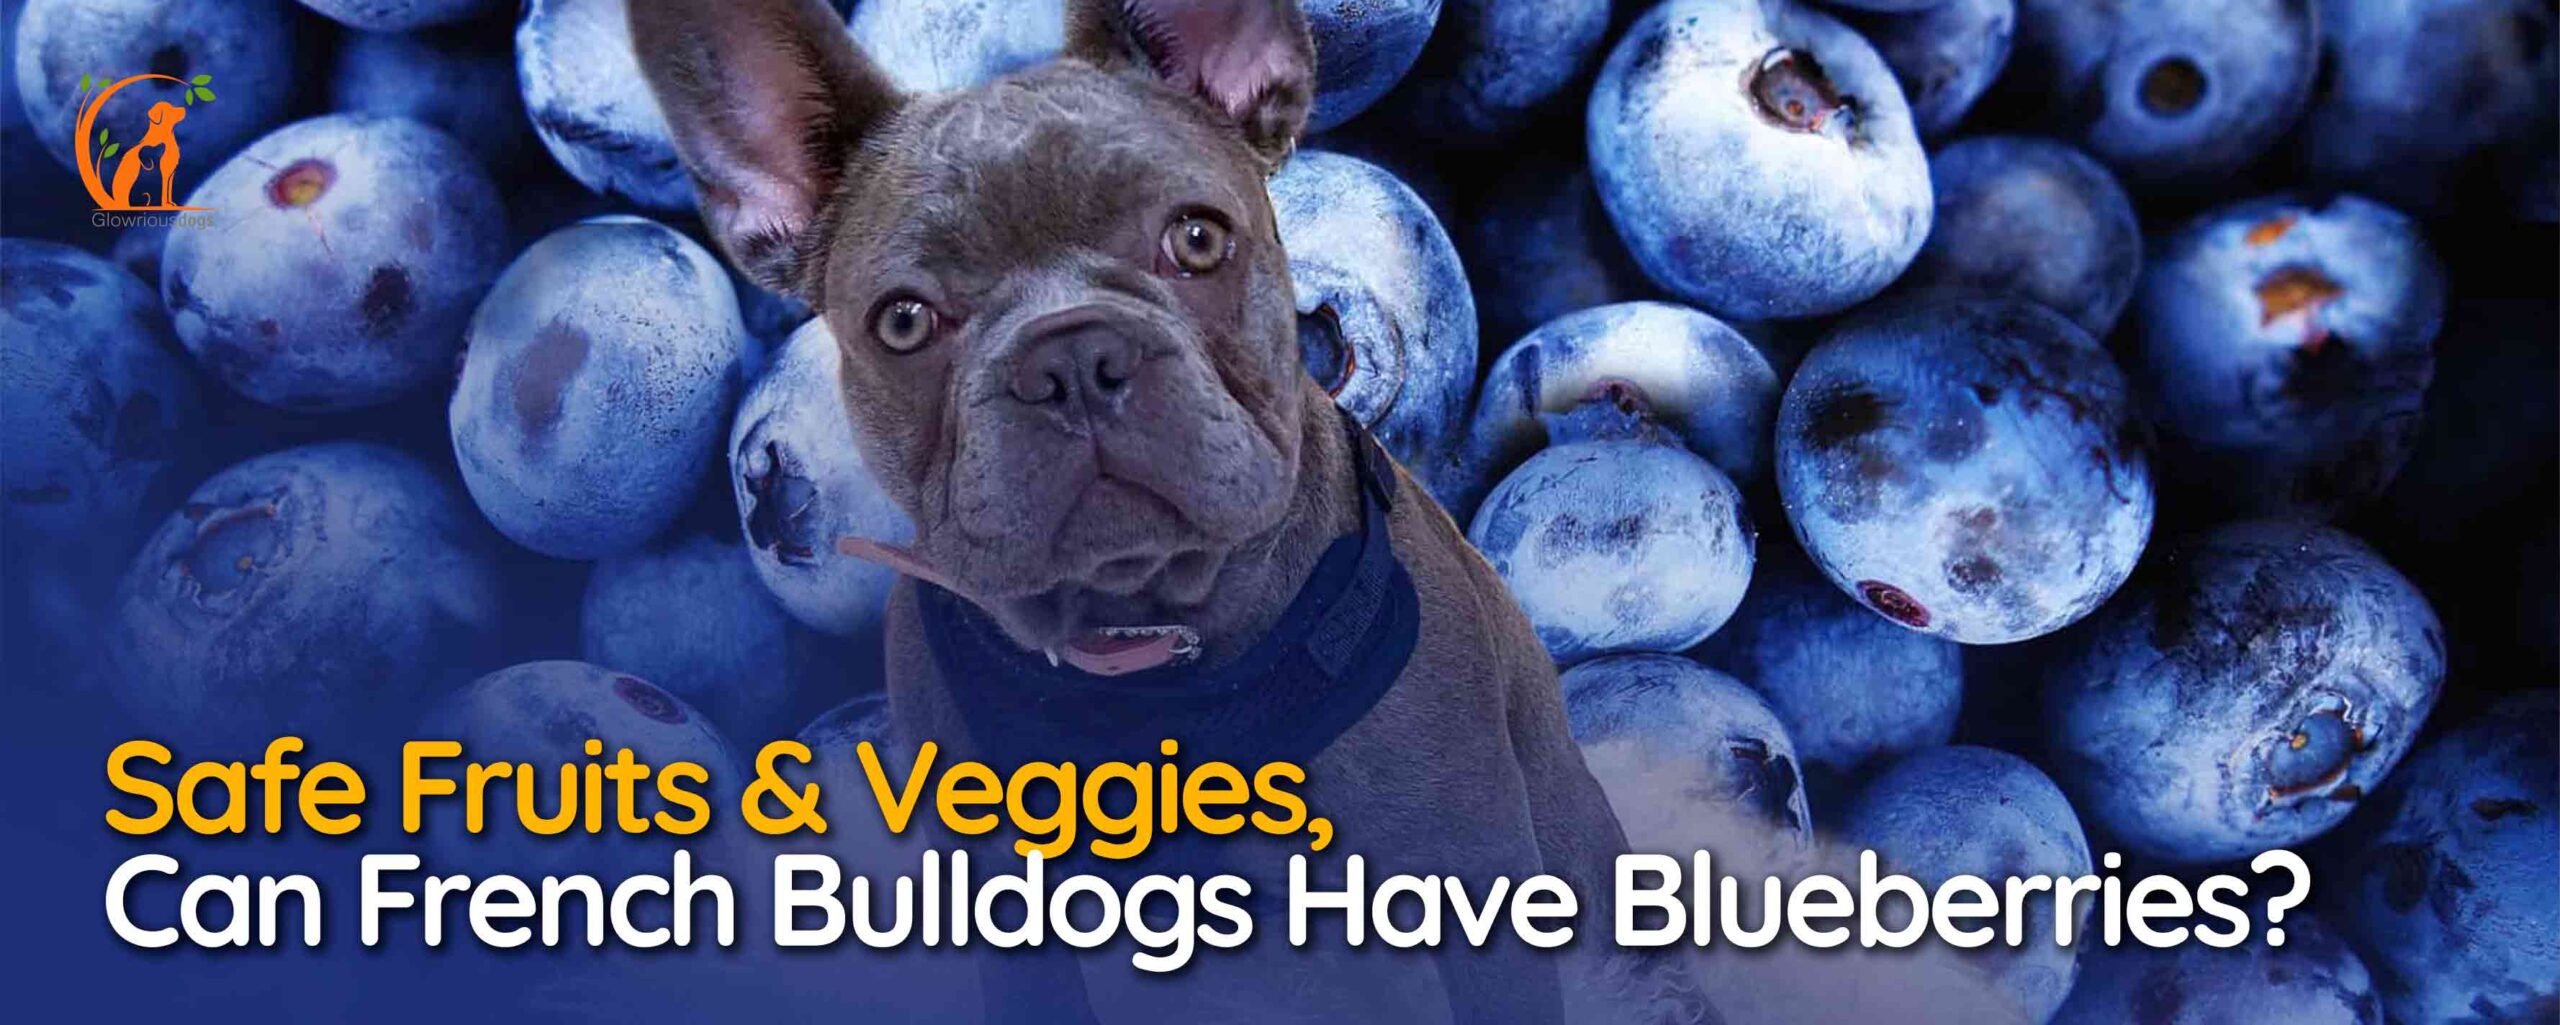 Can French Bulldogs Have Blueberries